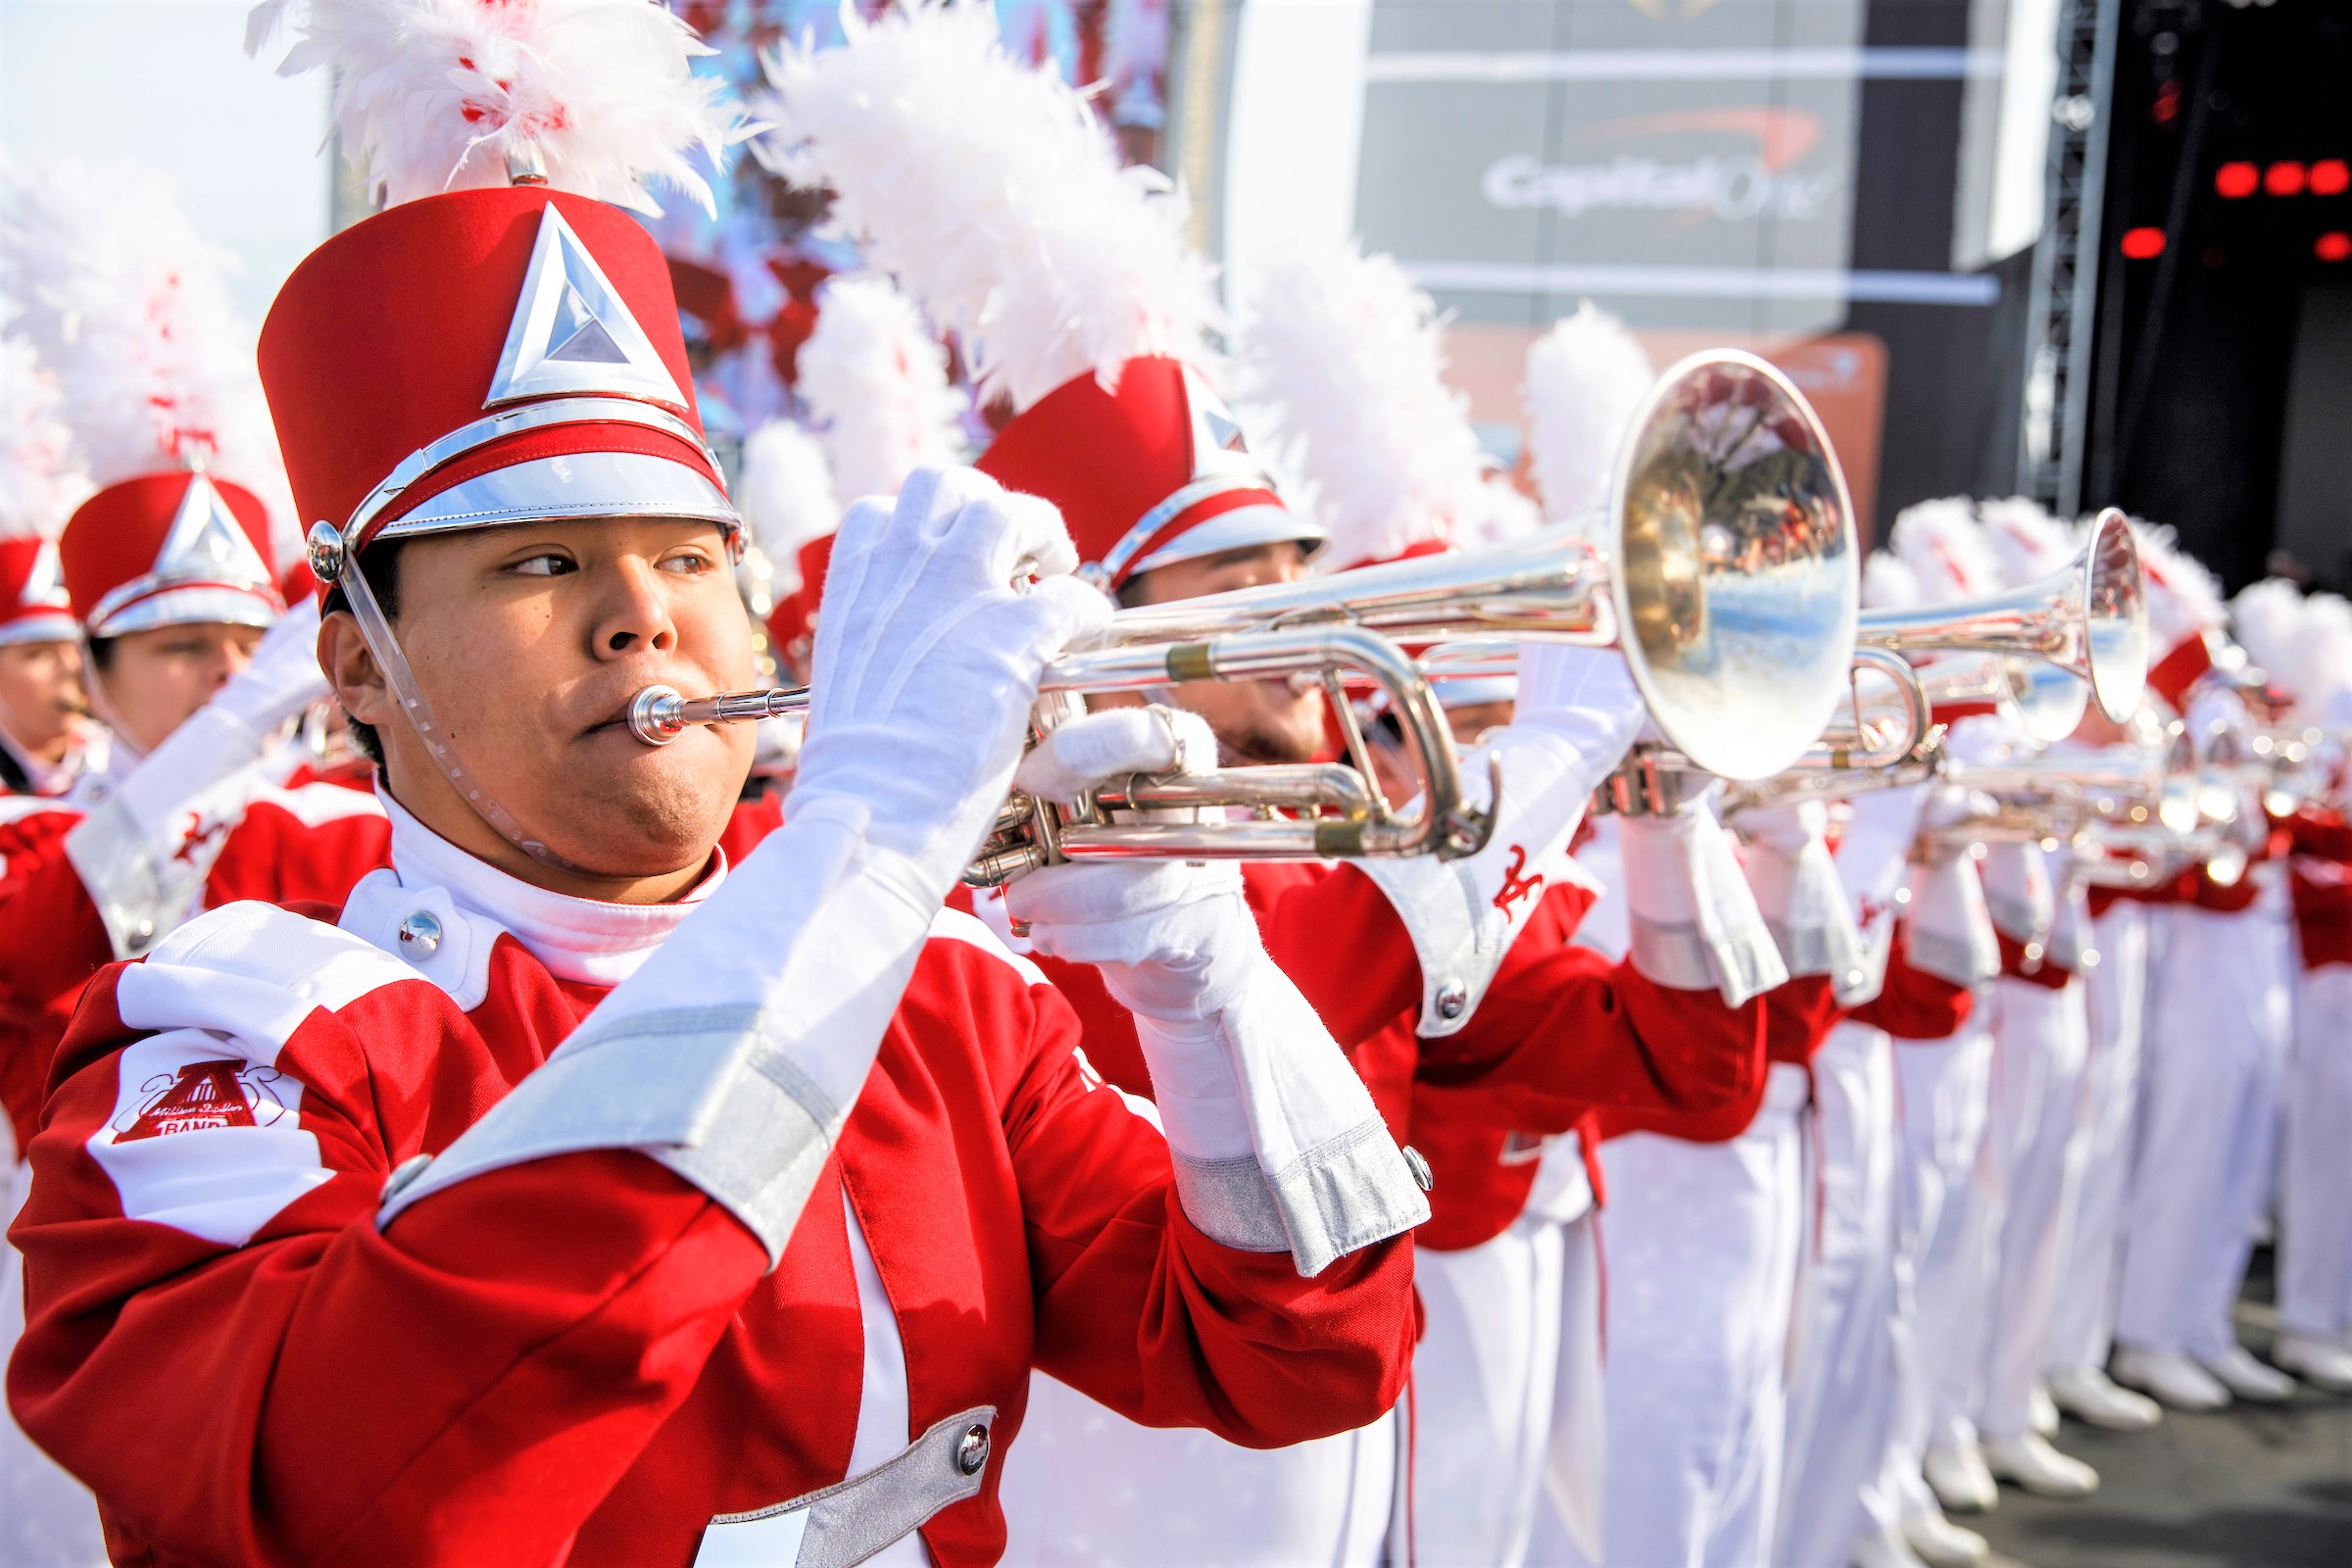 Alabama's Million Dollar Band to perform in 2020 Macy’s Thanksgiving